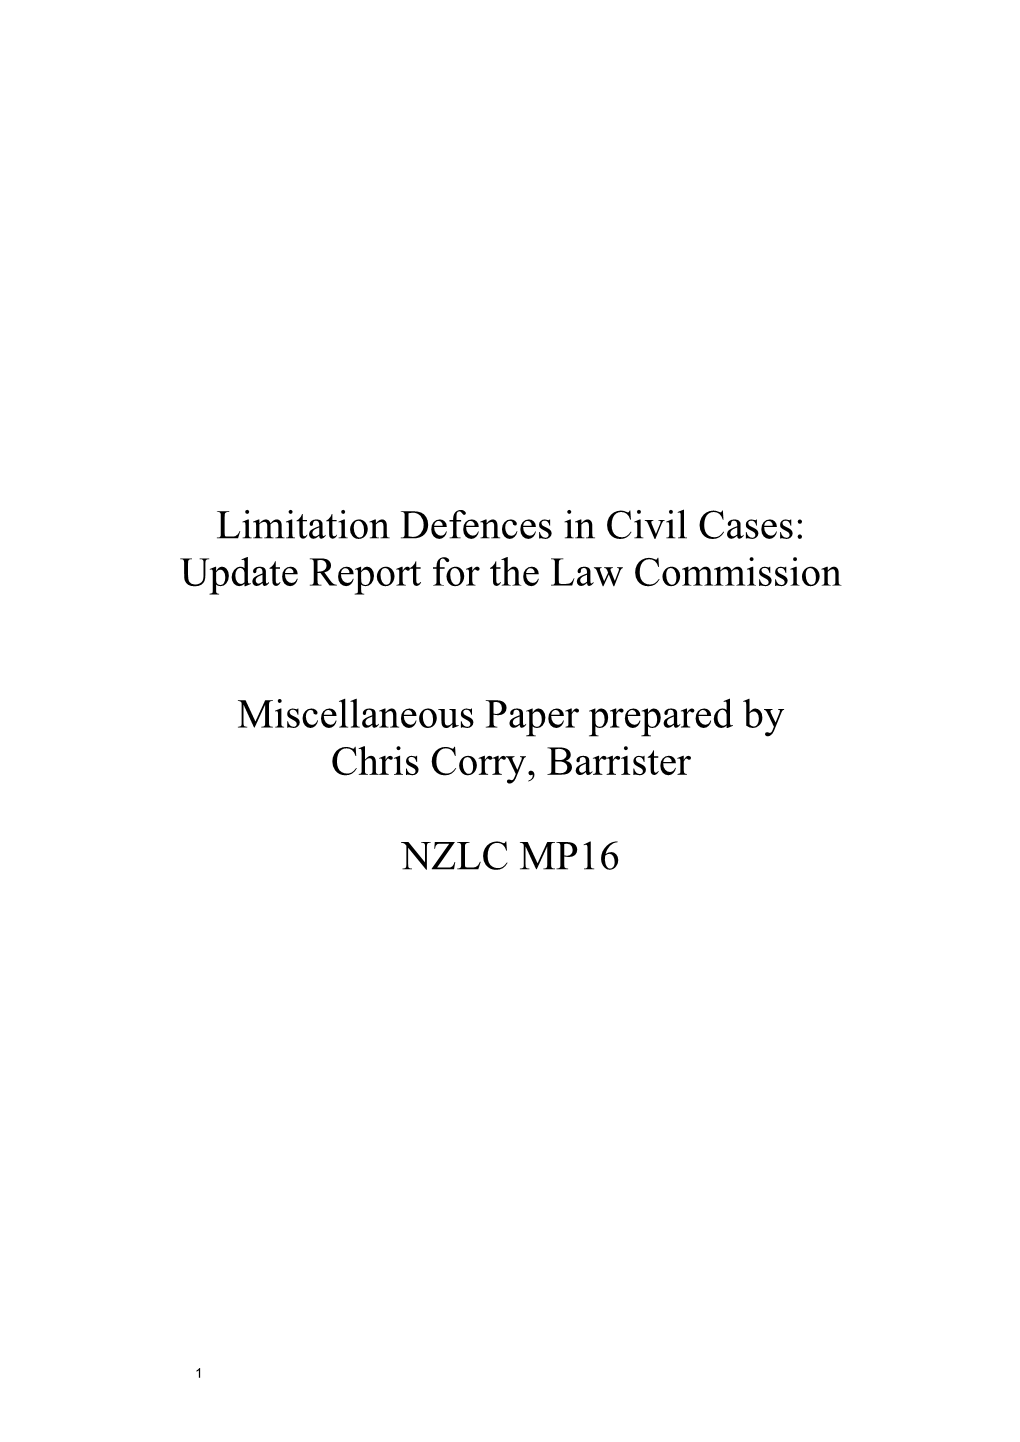 Limitation Defences in Civil Cases: Update Report for the Law Commission